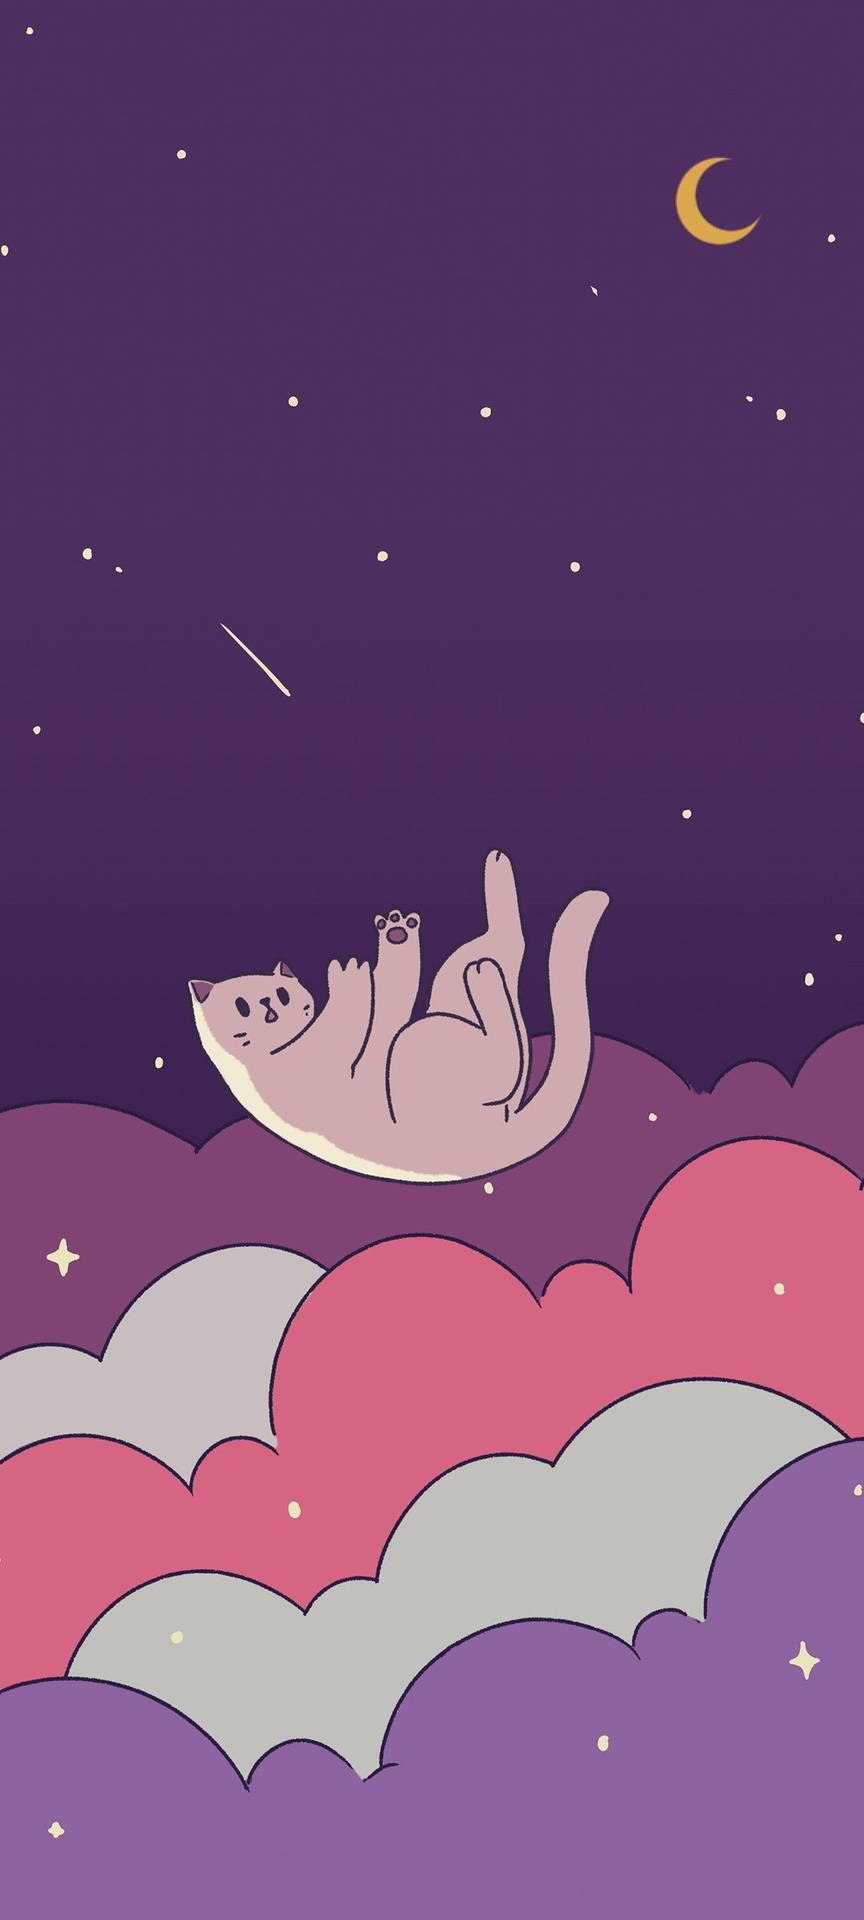 Aesthetic Falling Cat For Iphone Background